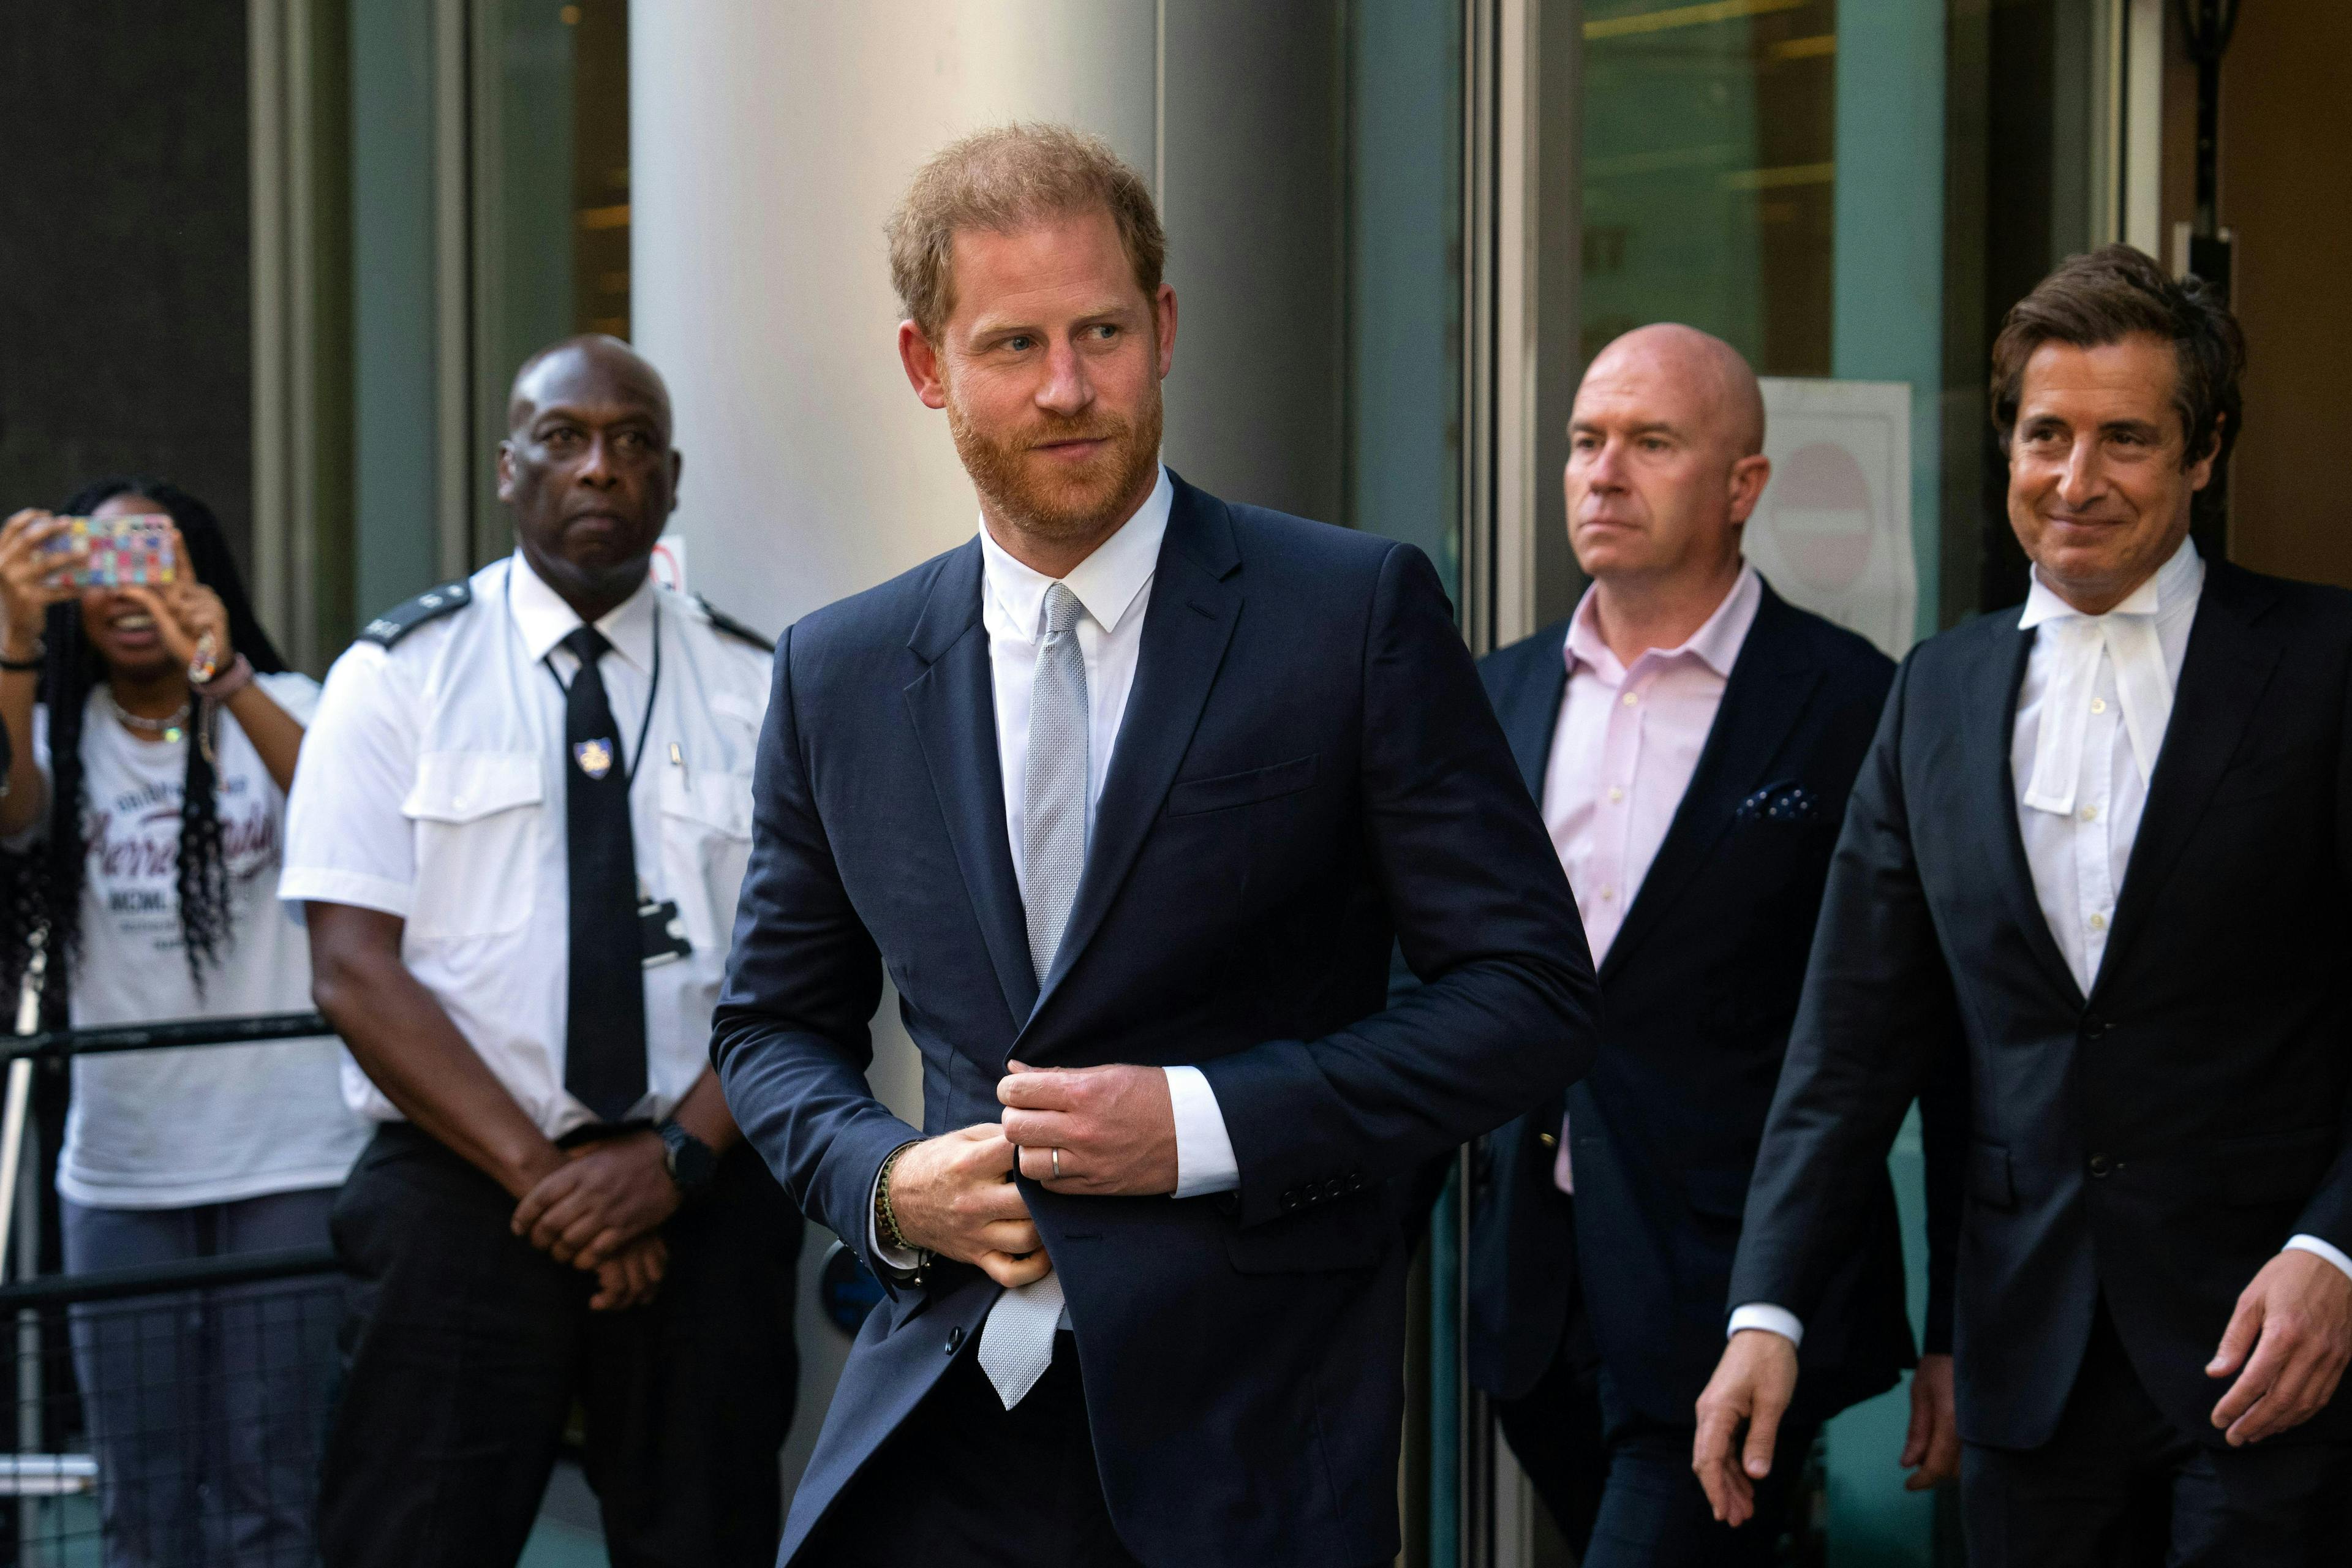 Prince Harry lawsuit; Prince Harry leaving after giving evidence at the Mirror Group Phone hacking trial for his lawsuit against 'The Sun,' set to be seen in court this January.